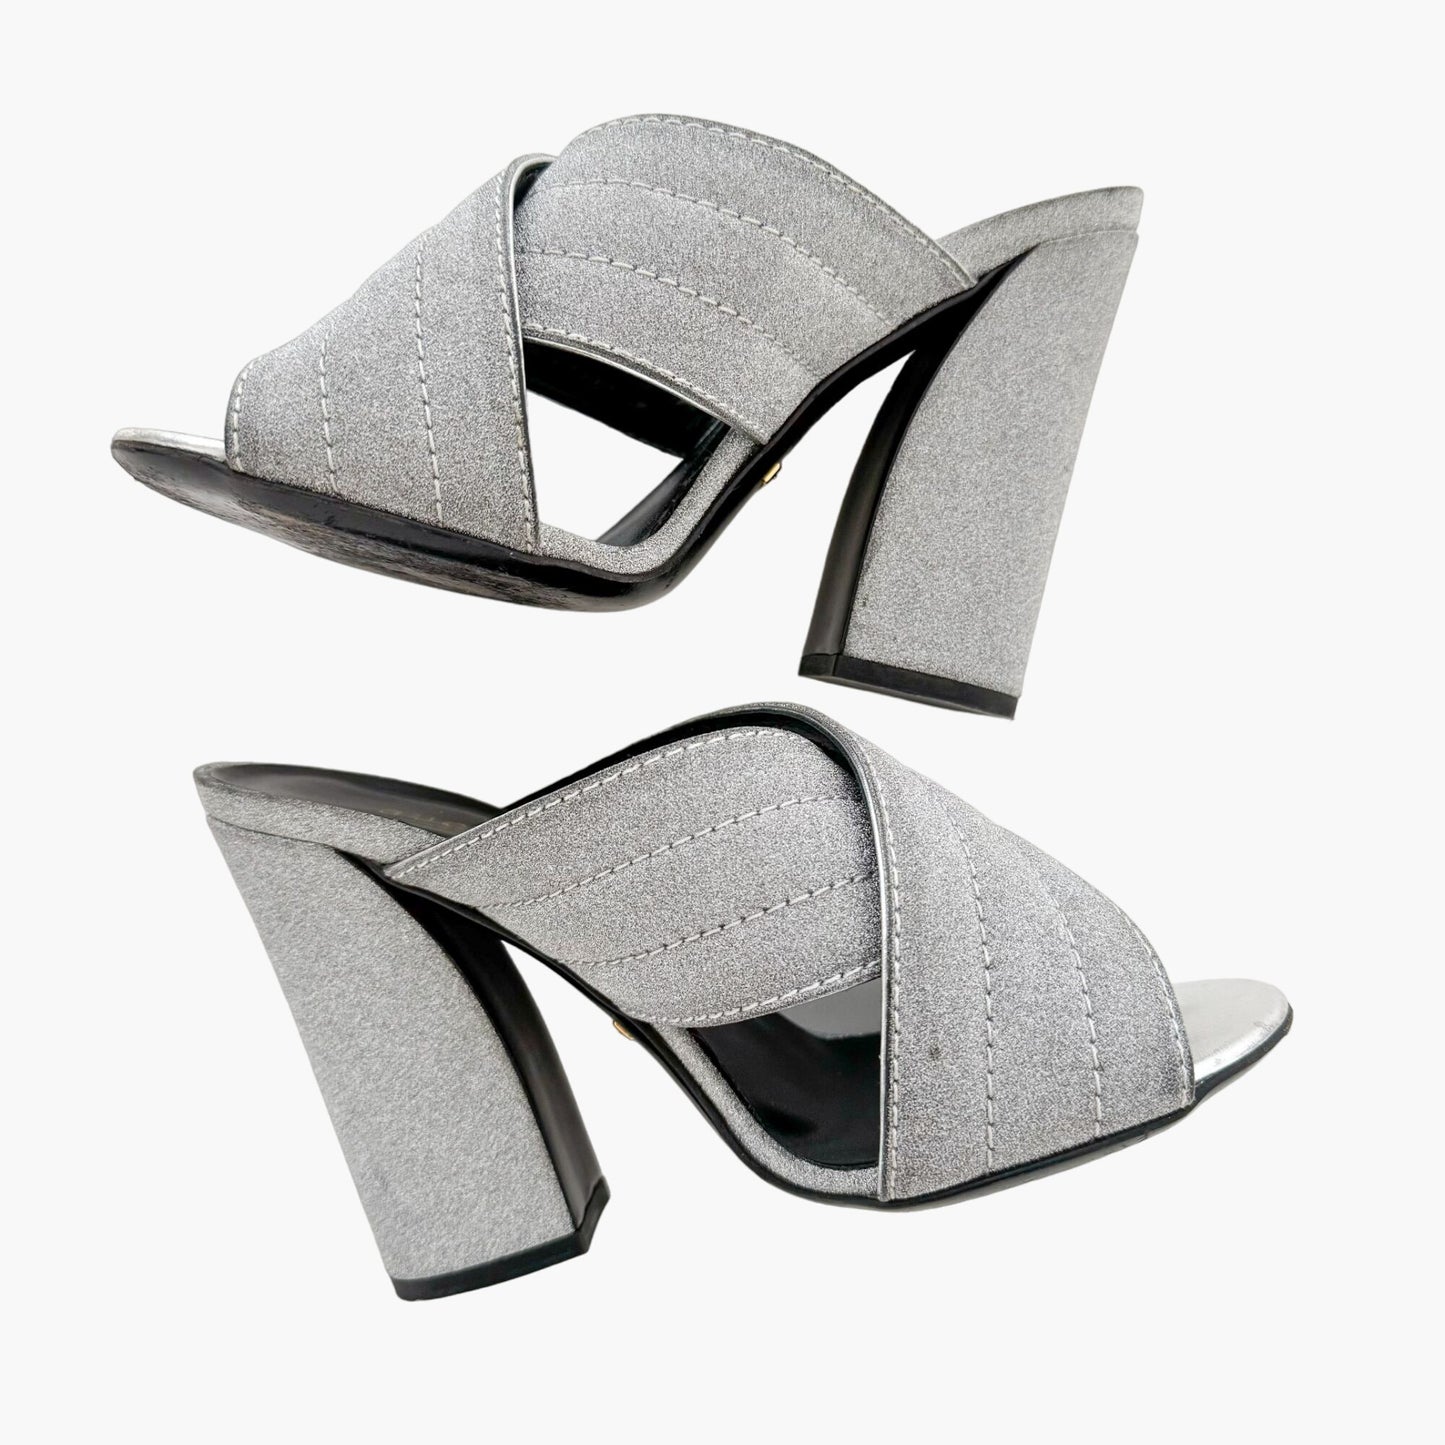 Gucci Webby Mules in Argento Silver Glitter Size 37